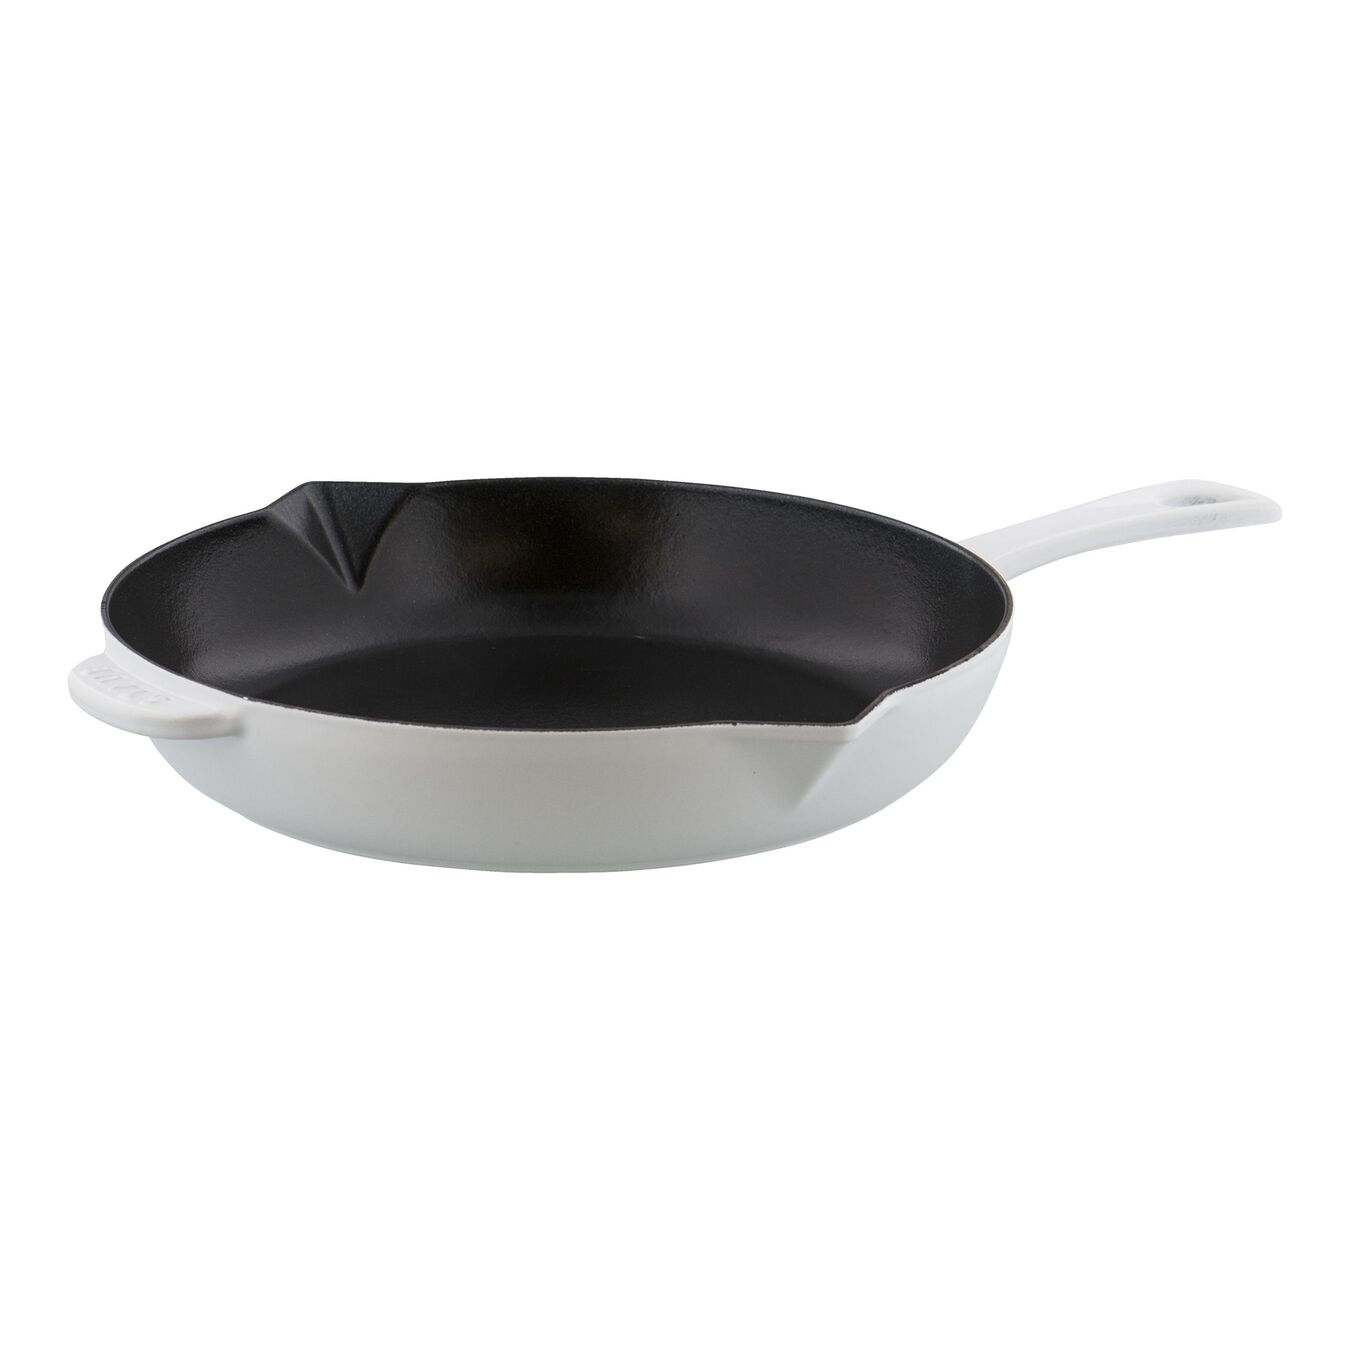 26 cm / 10 inch cast iron Frying pan, pure-white - Visual Imperfections,,large 1